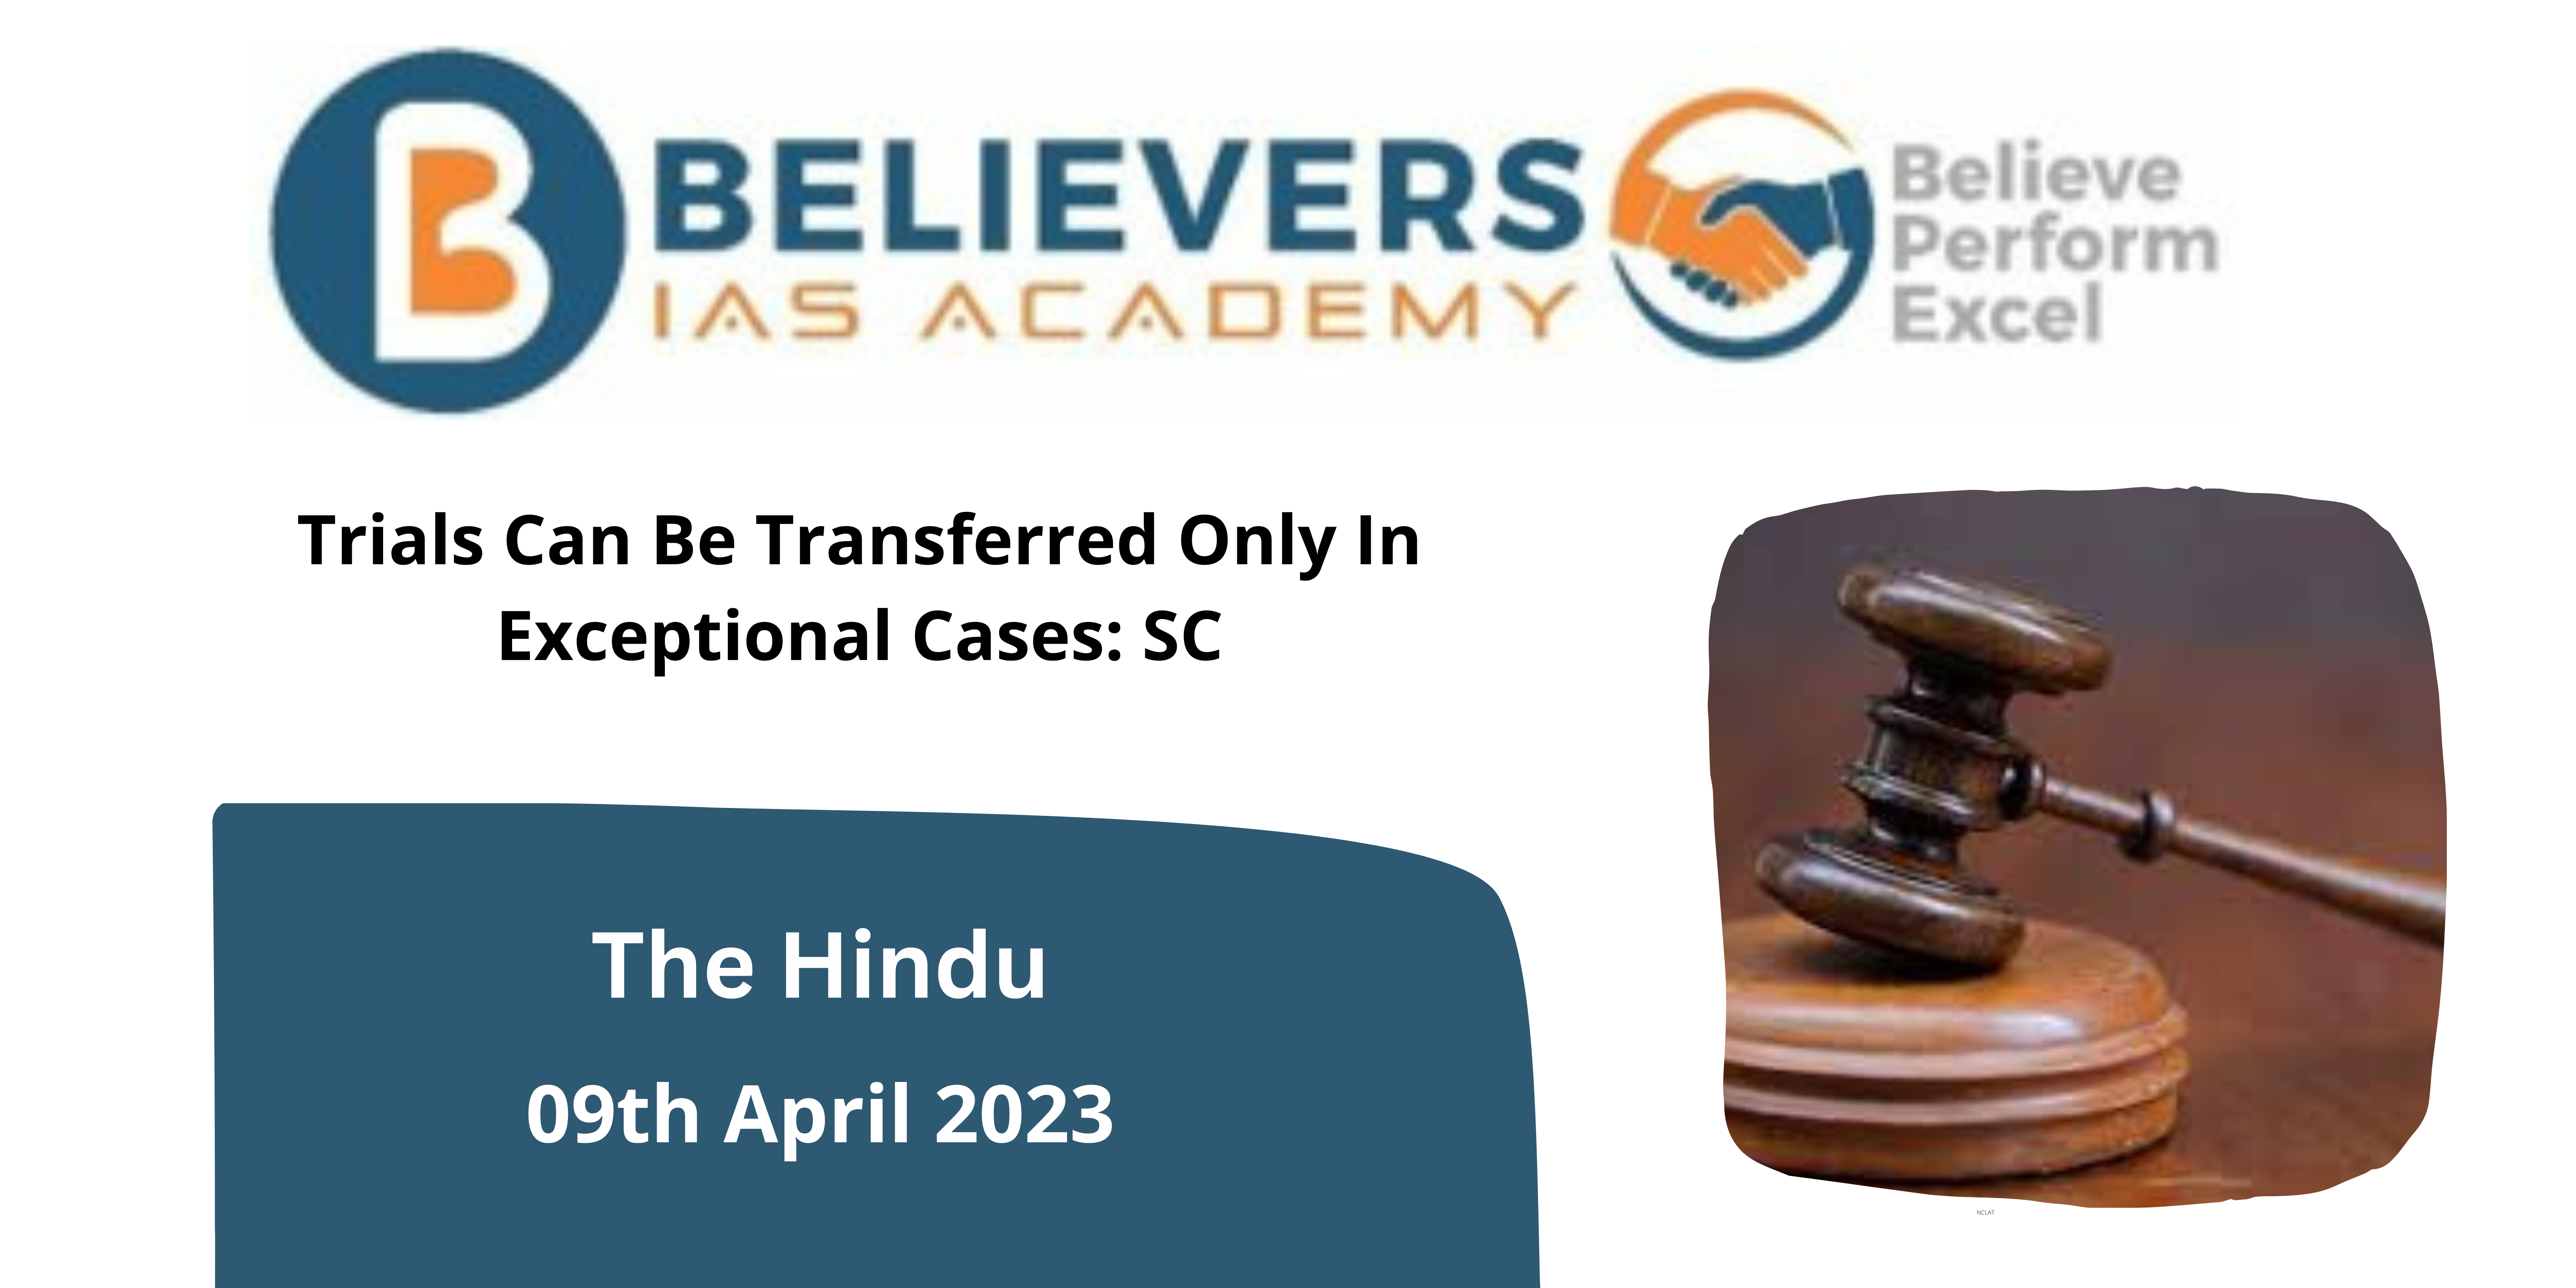 Trials Can Be Transferred Only In Exceptional Cases: SC